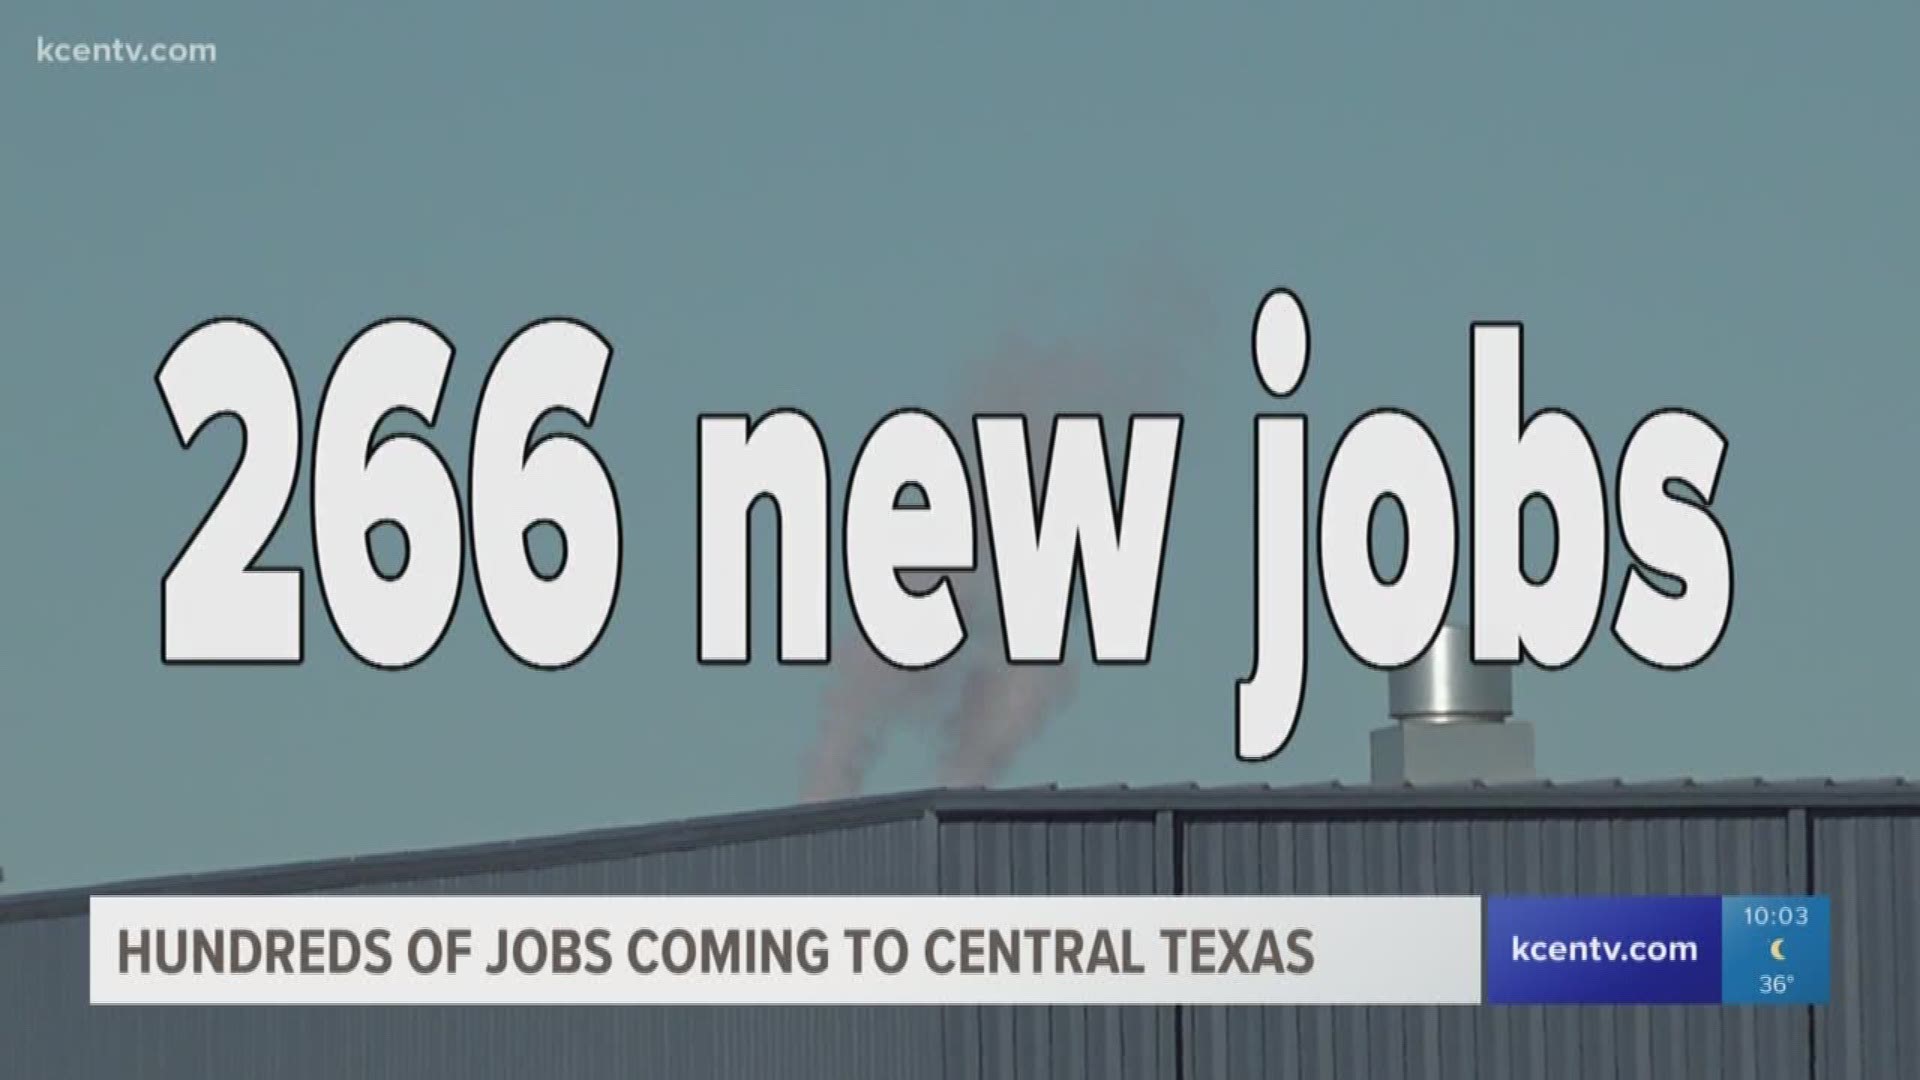 East Penn bringing hundreds of jobs coming to Central Texas